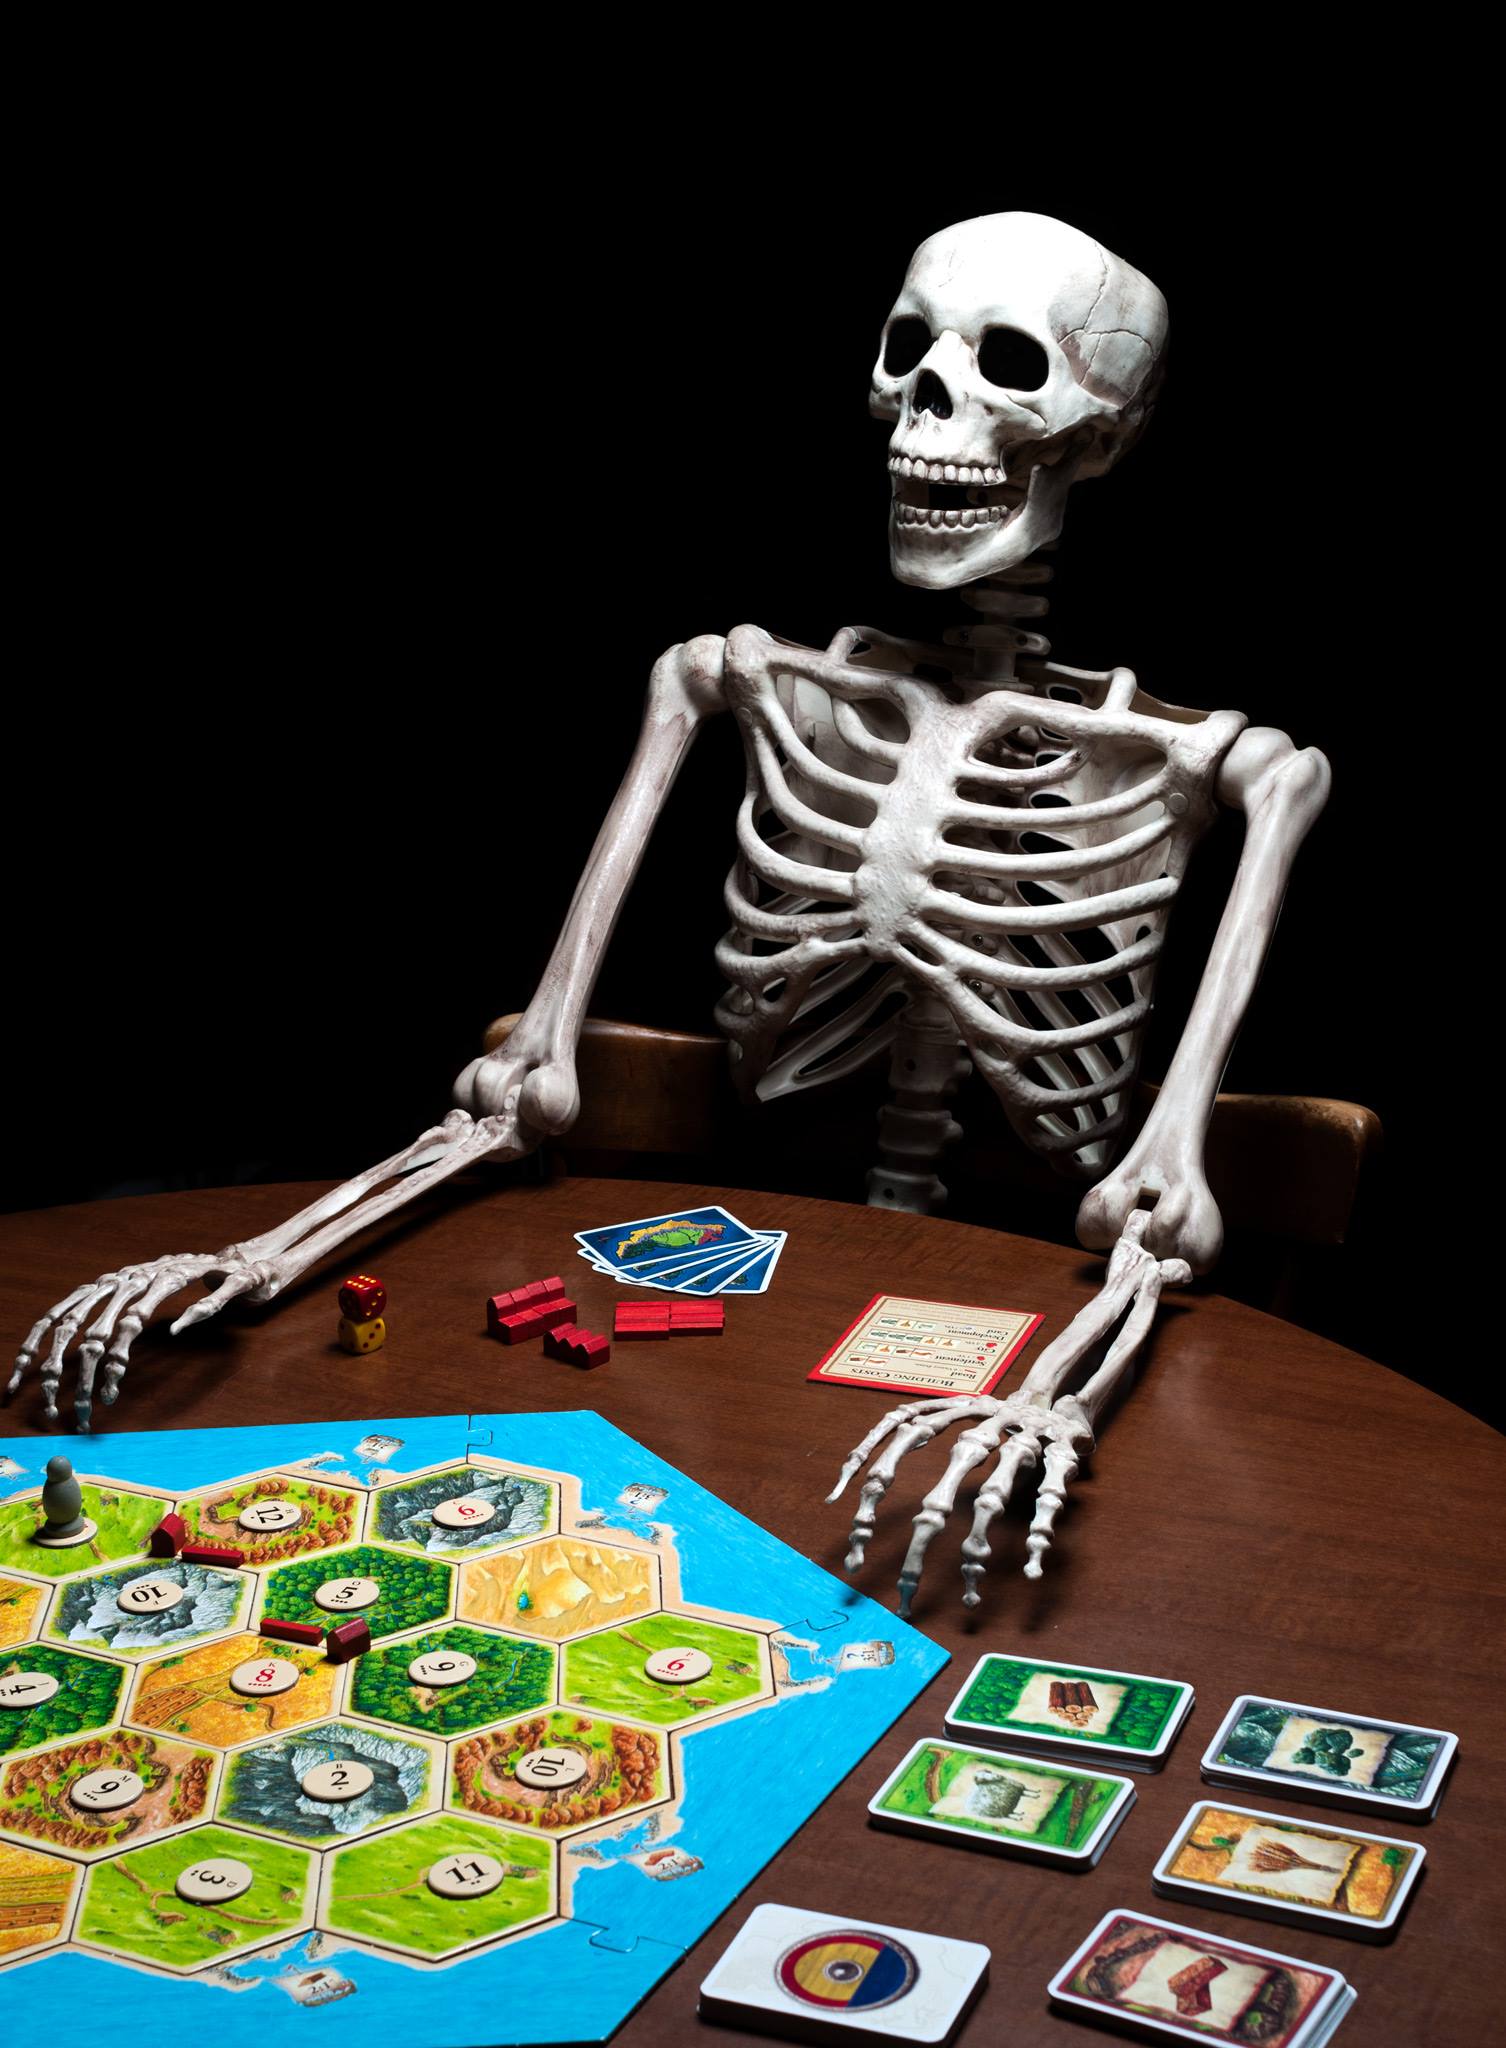 Skeleton waiting for player with AP to take their turn